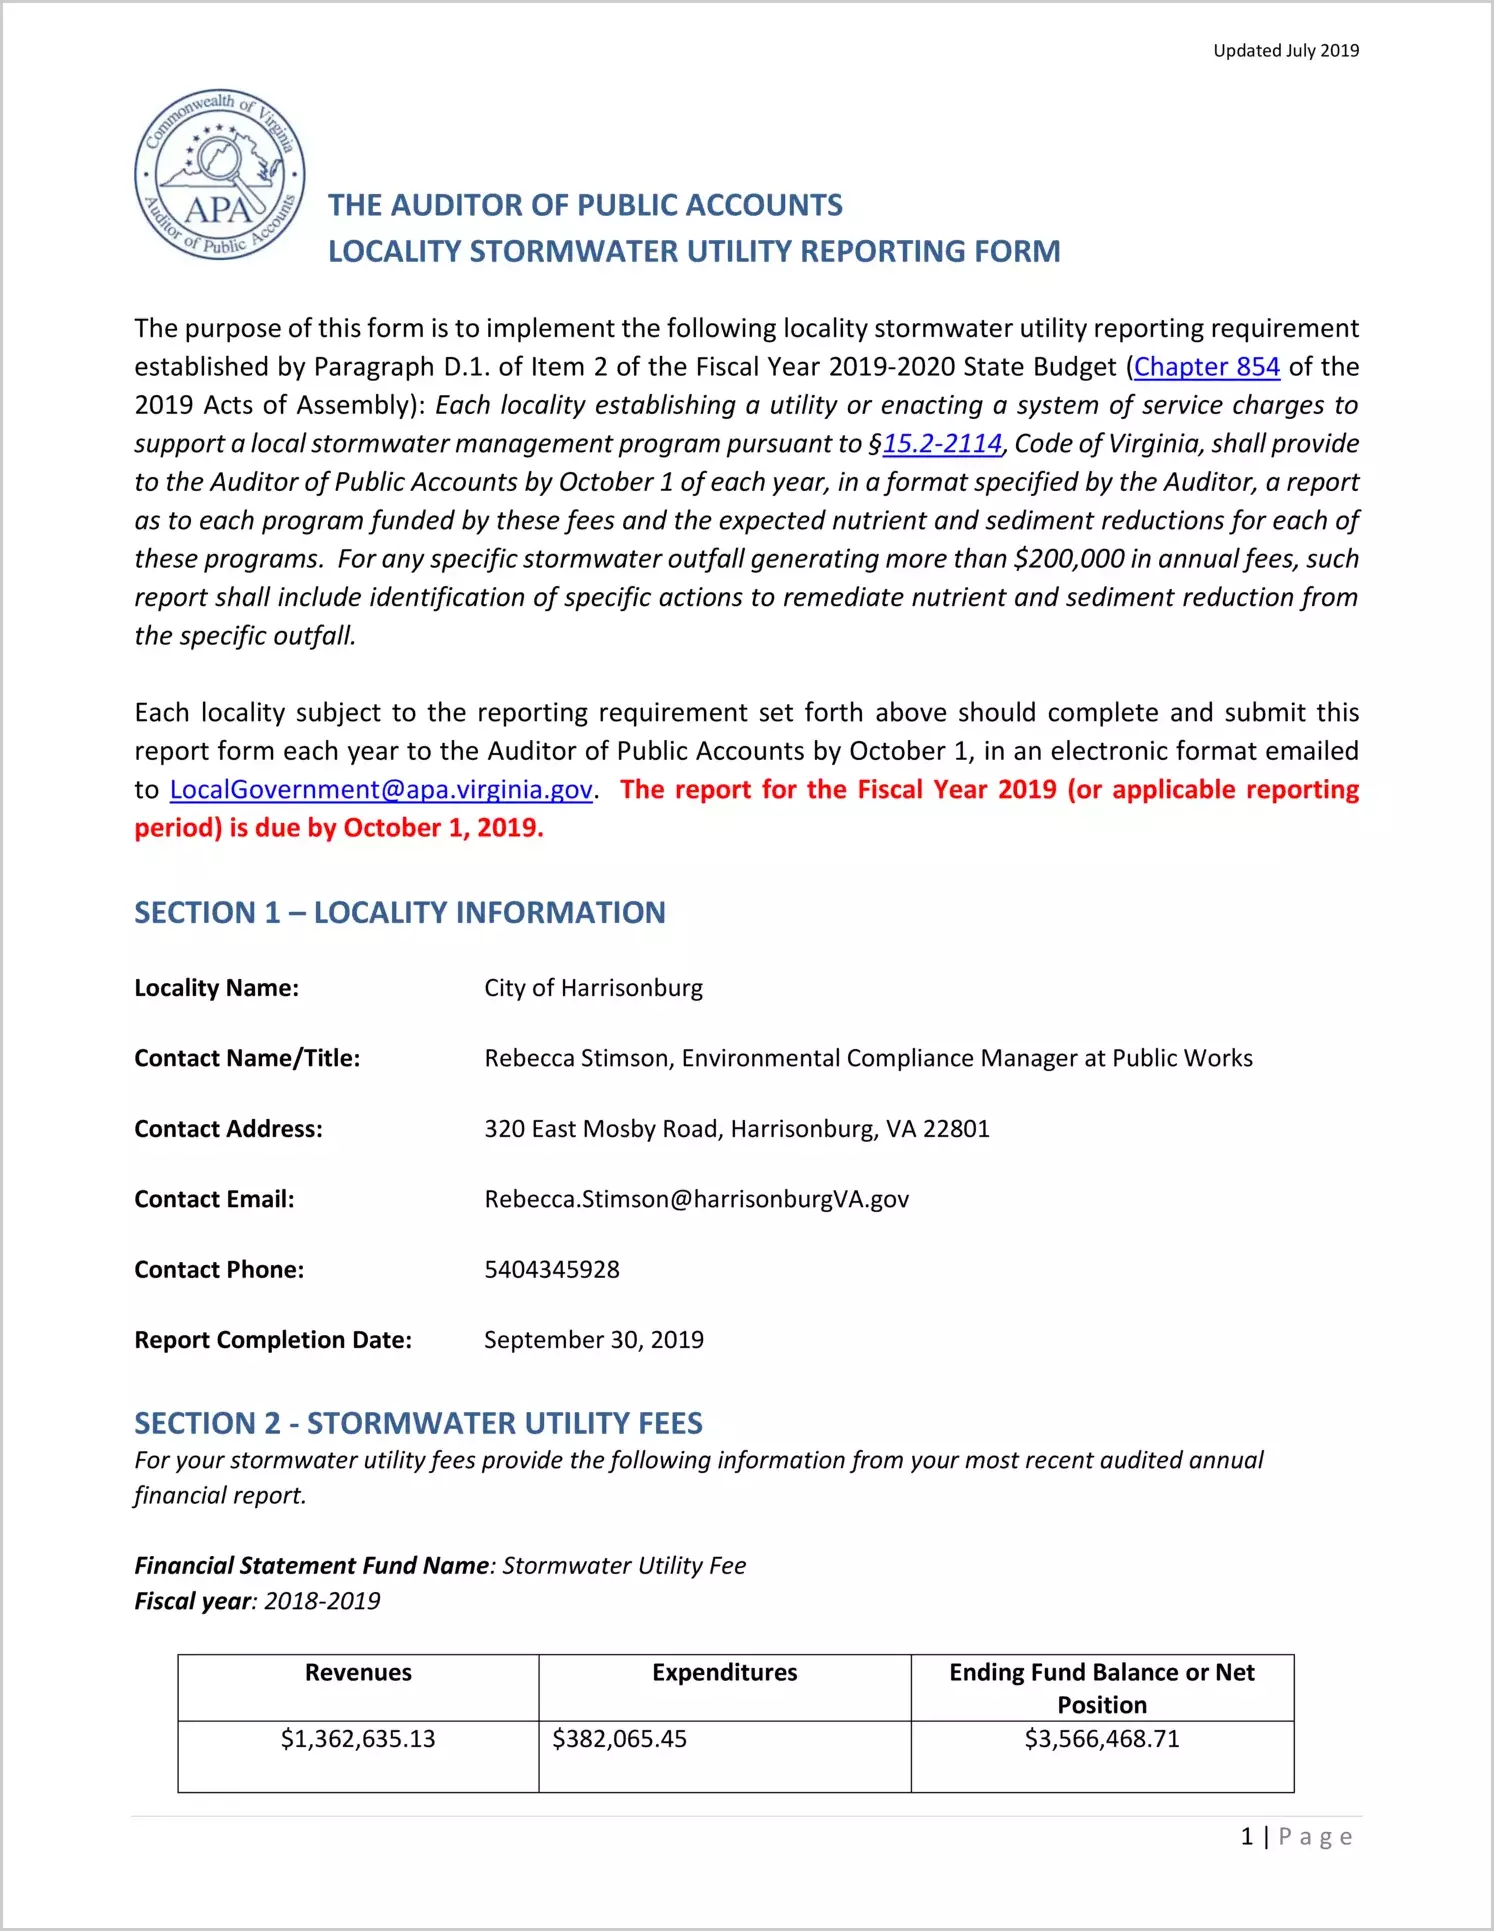 2019 Stormwater Utility Report for City of Harrisonburg